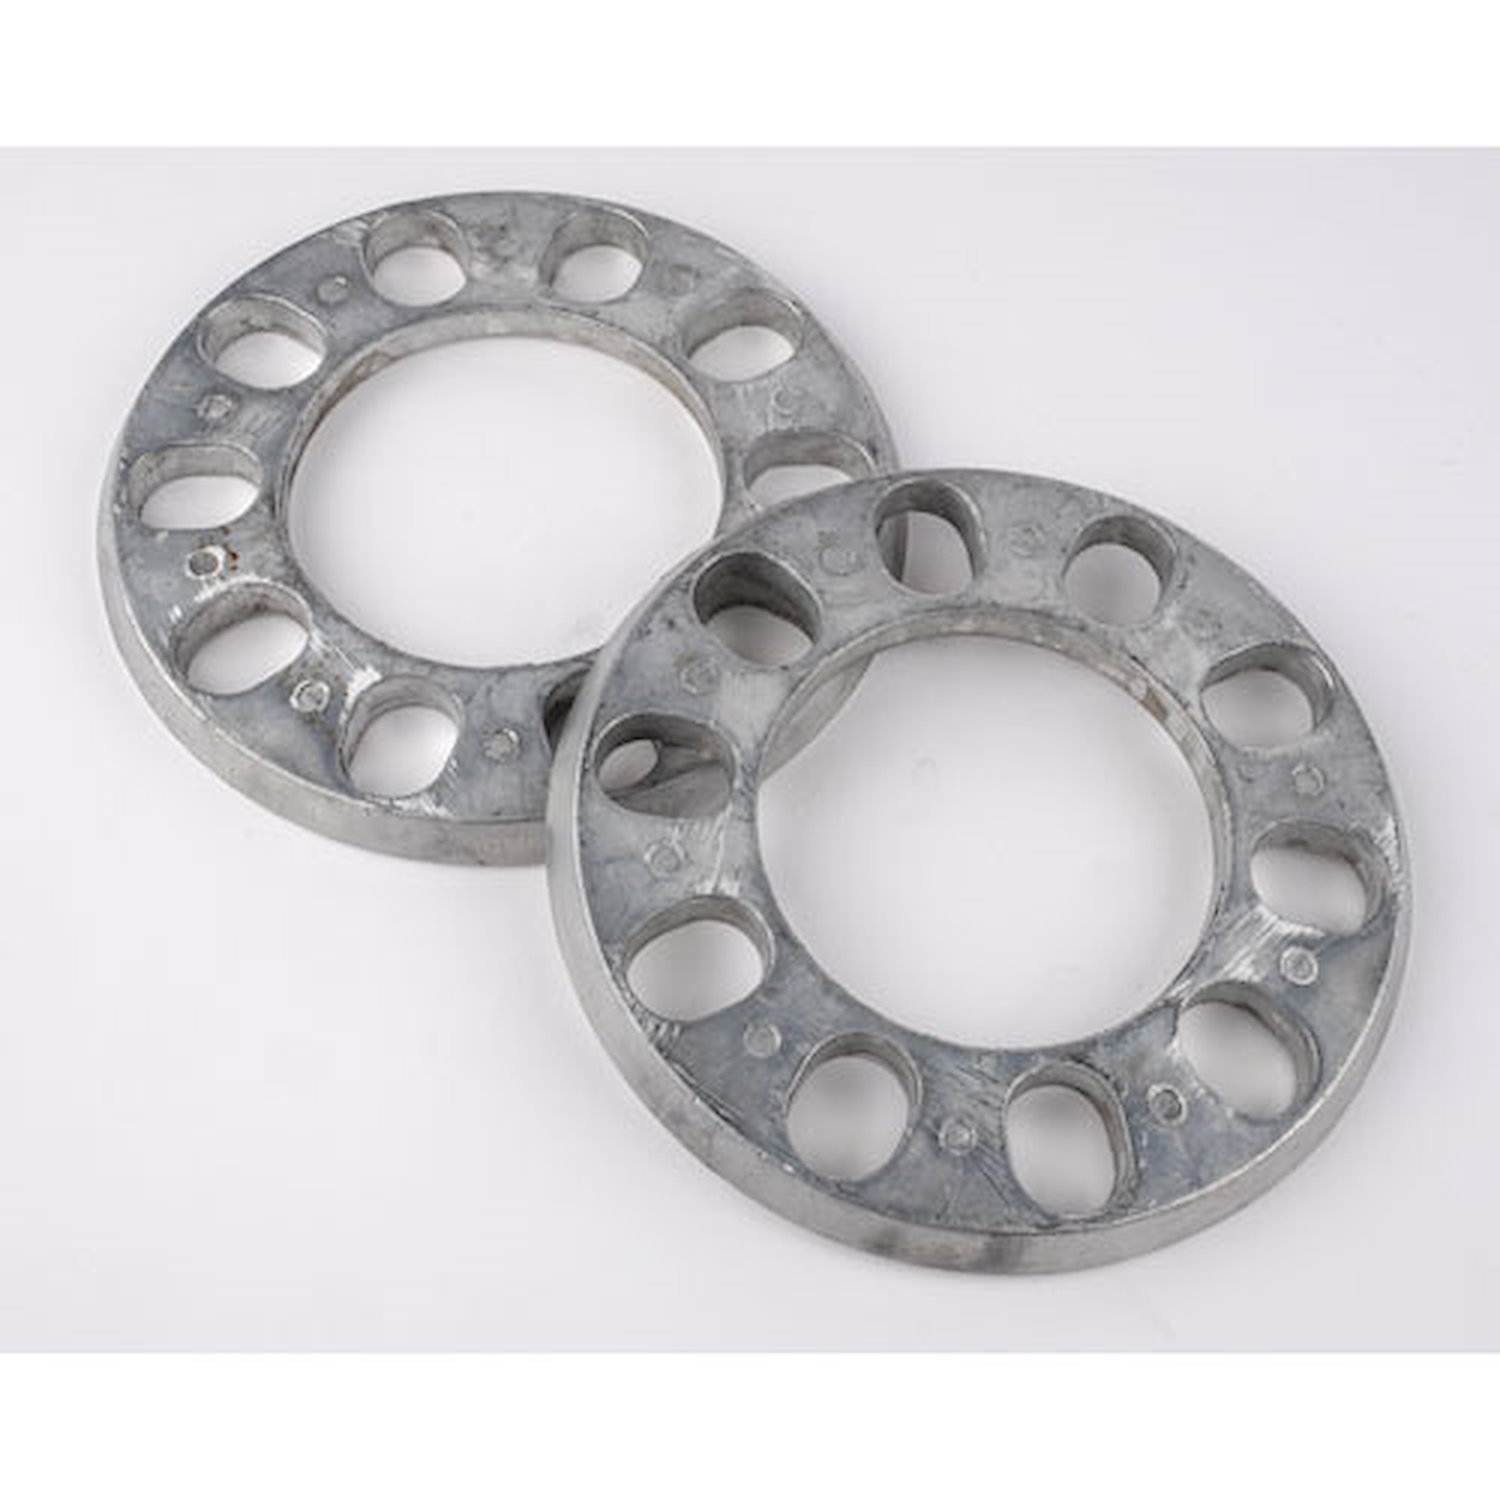 Wheel Spacers 7/16" Thick